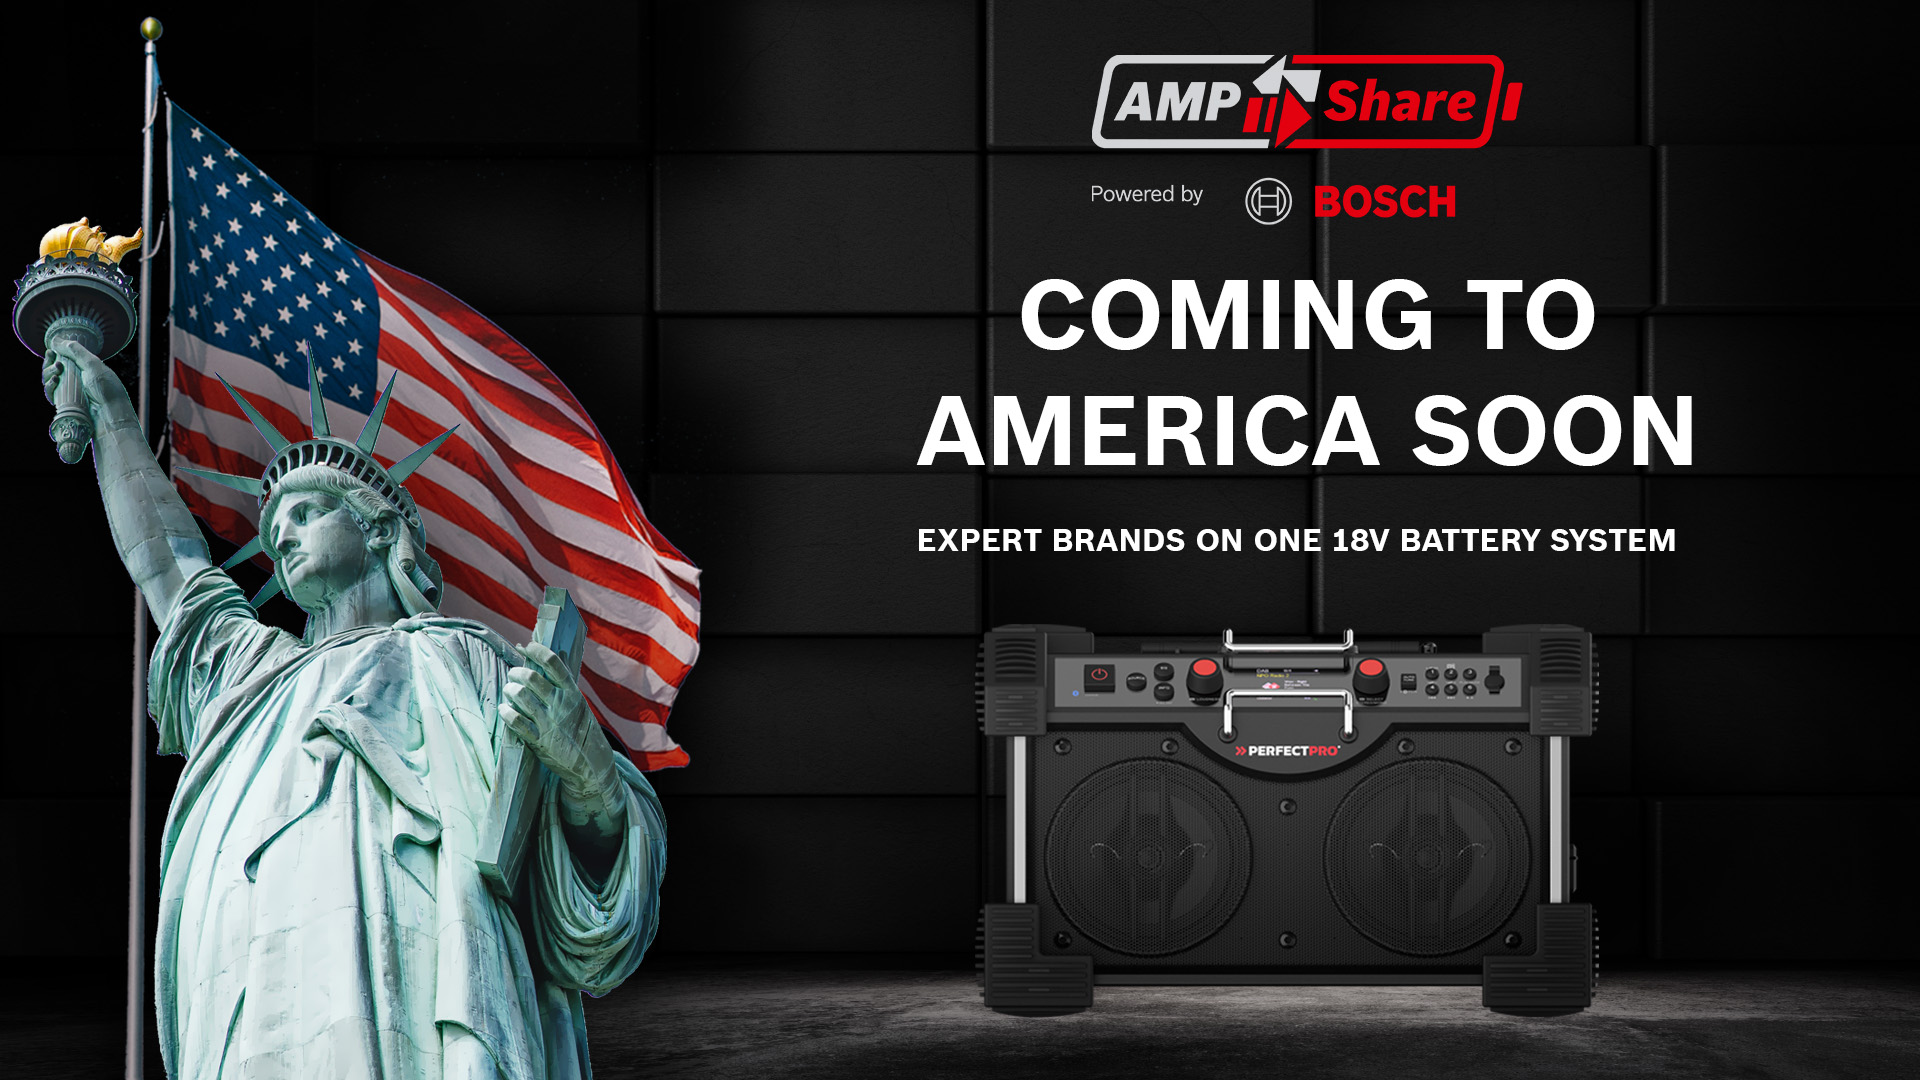 AMPShare – Powered by Bosch Launches in the U.S. and Canada